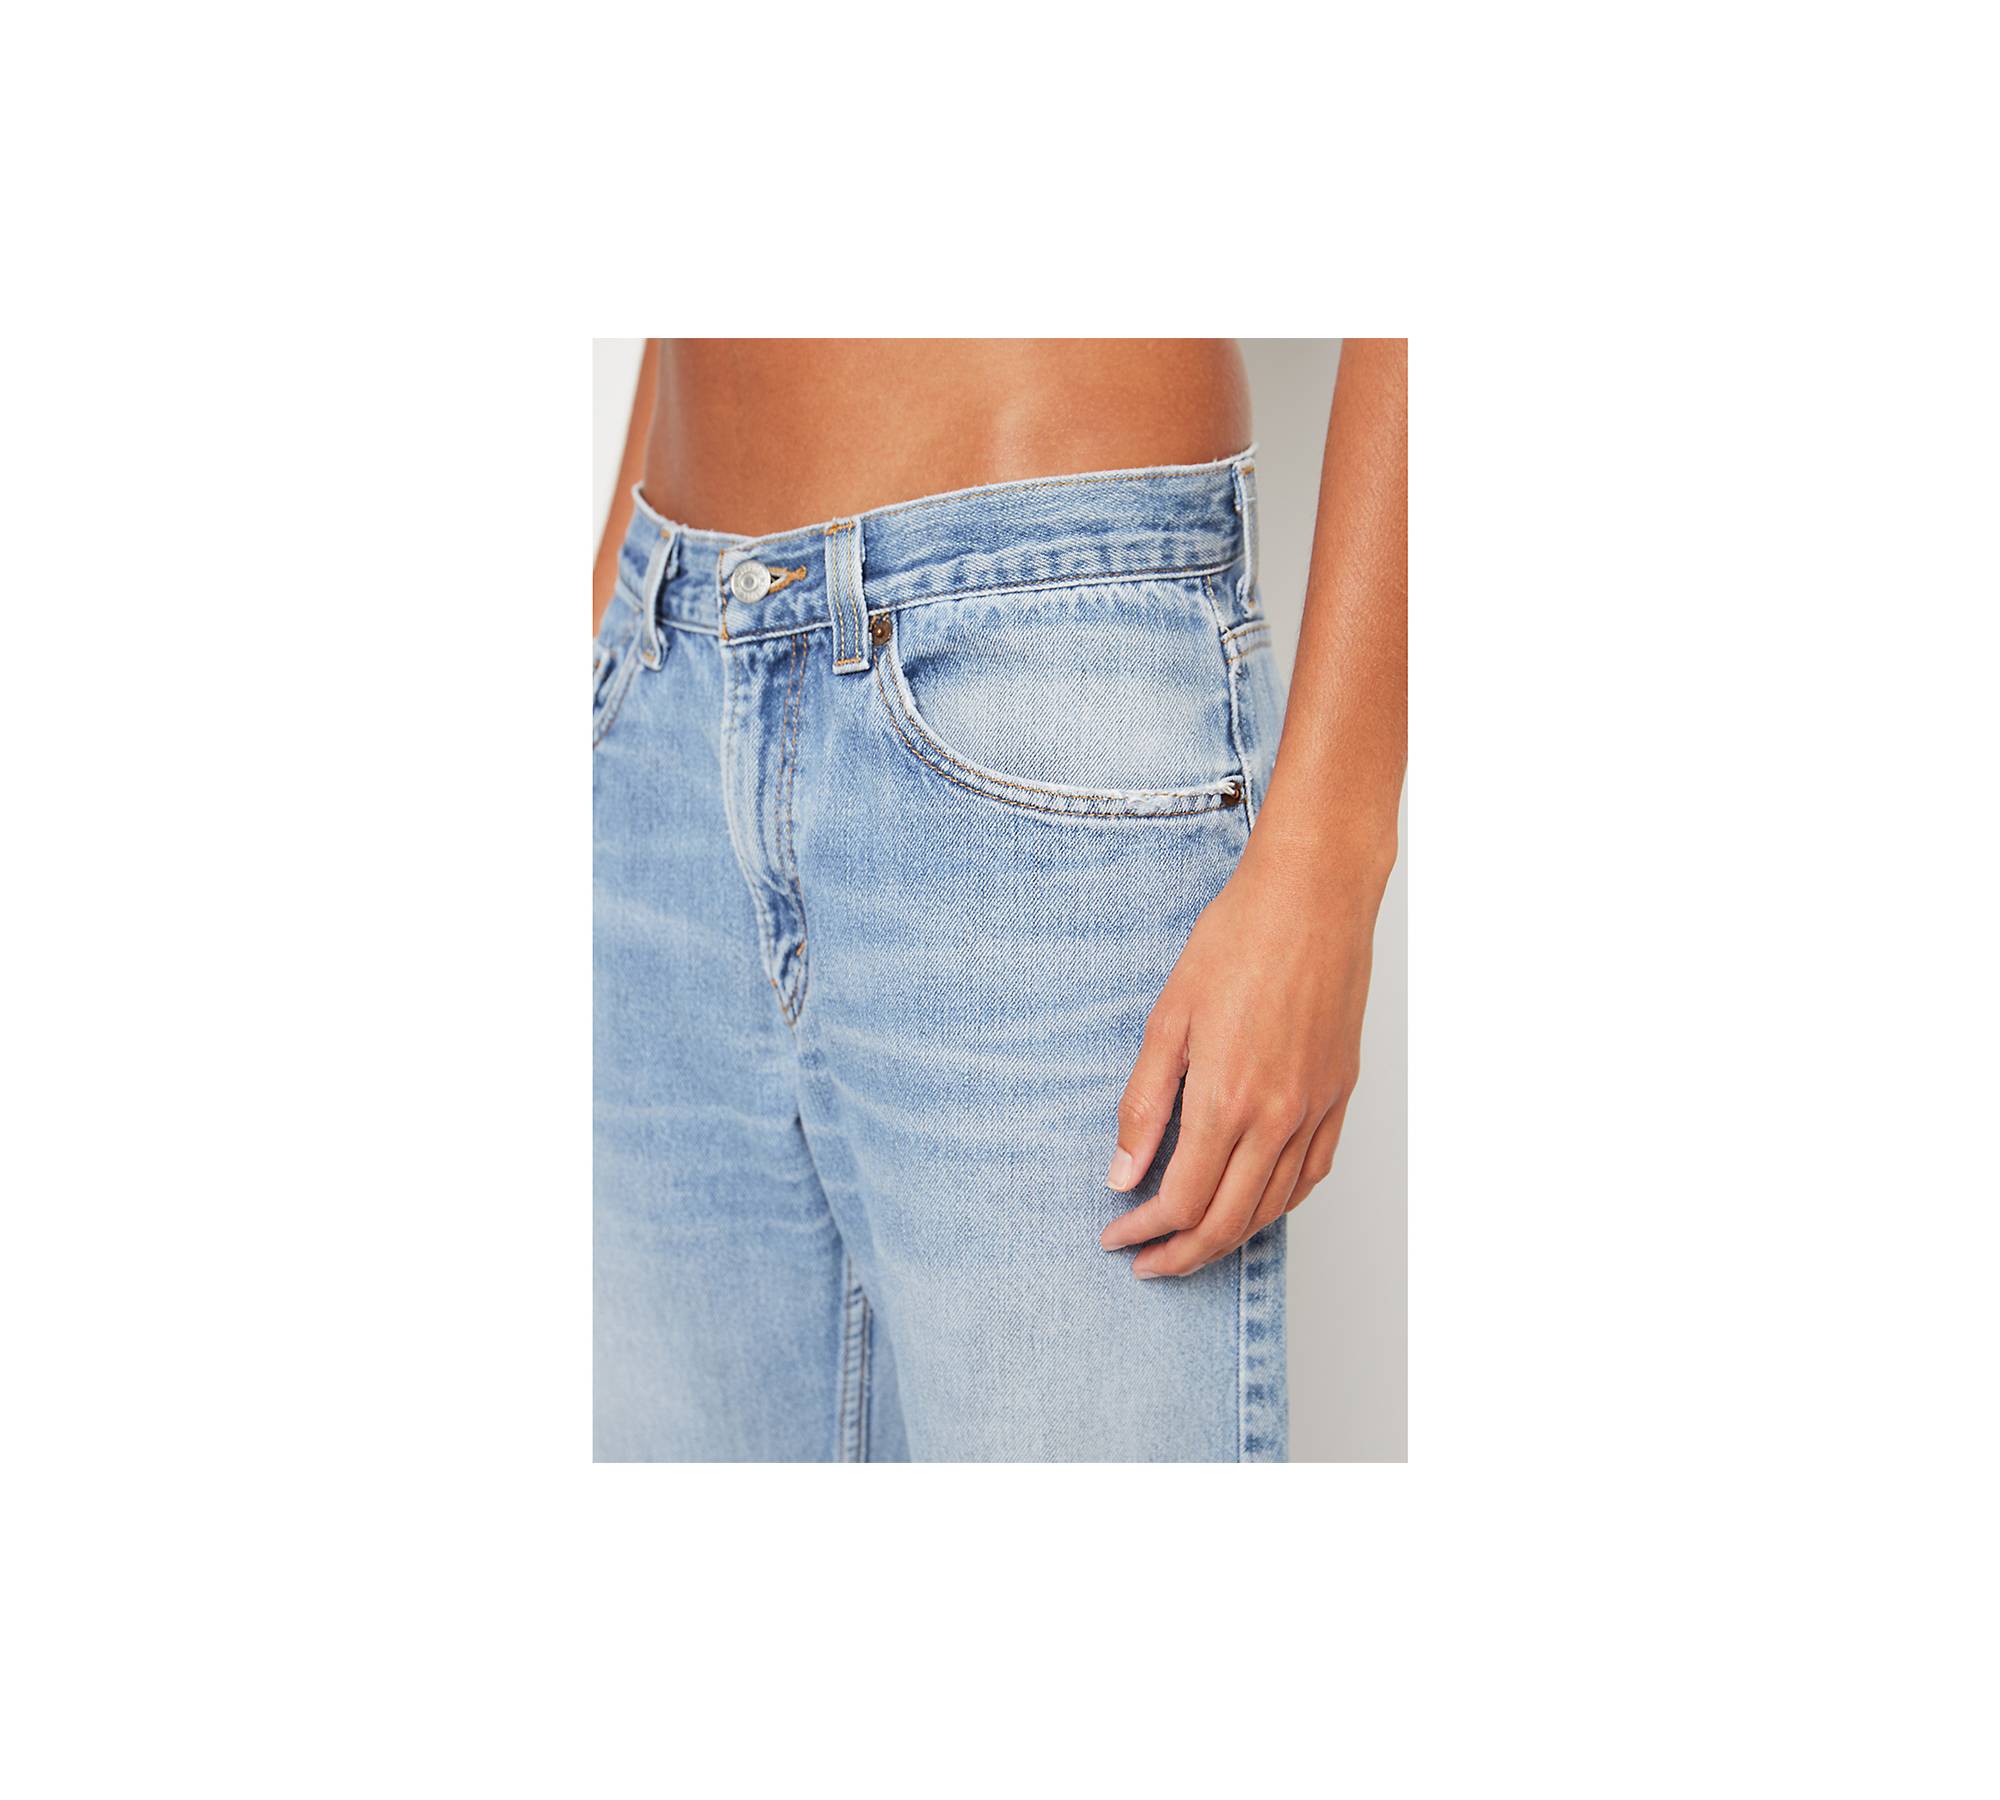 Levis Big Baggy Jeans - Real World